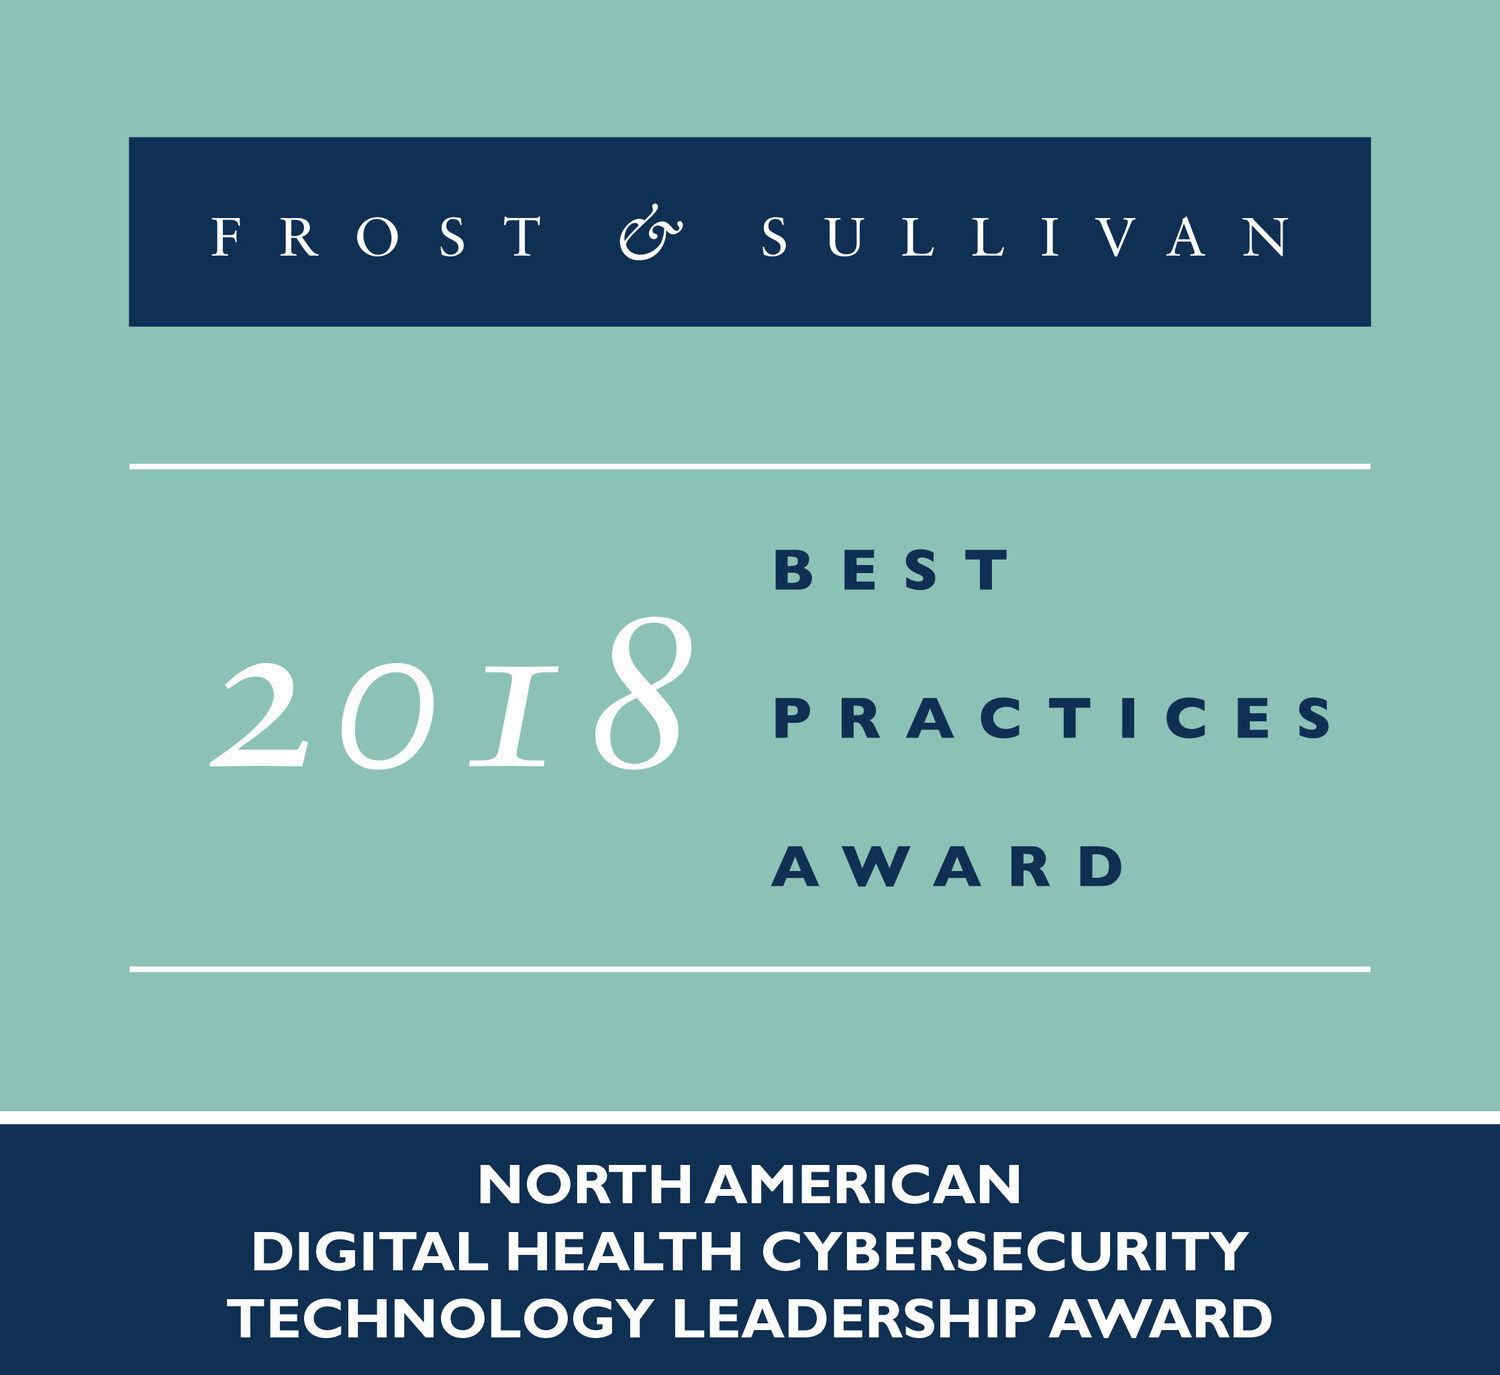 Frost & Sullivan presents their 2018 North American Technology Leadership Award to Imprivata